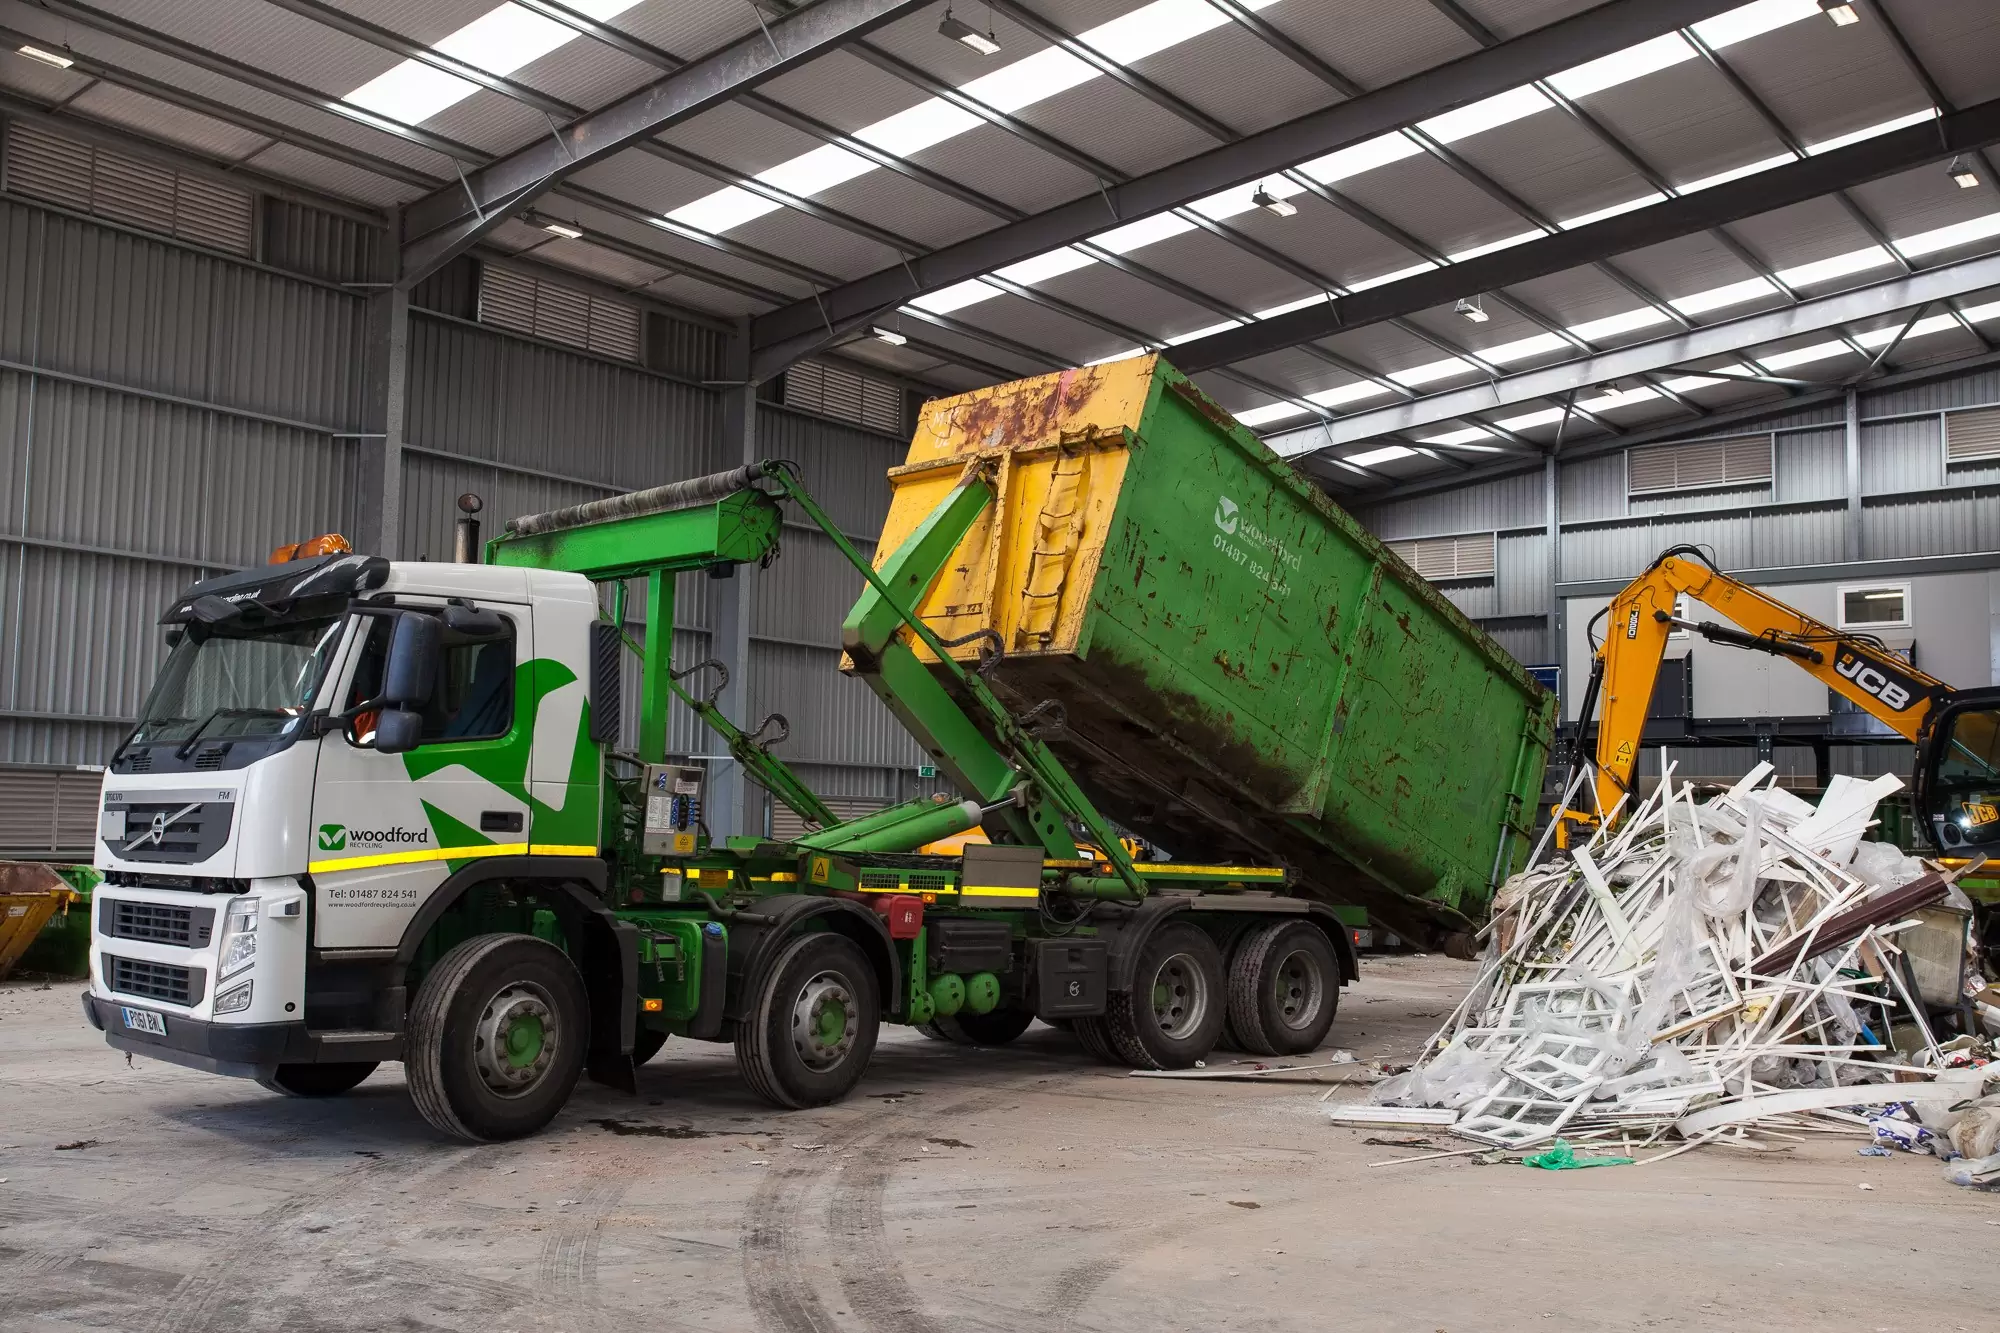 skip hire St Neots - Woodford Recycling